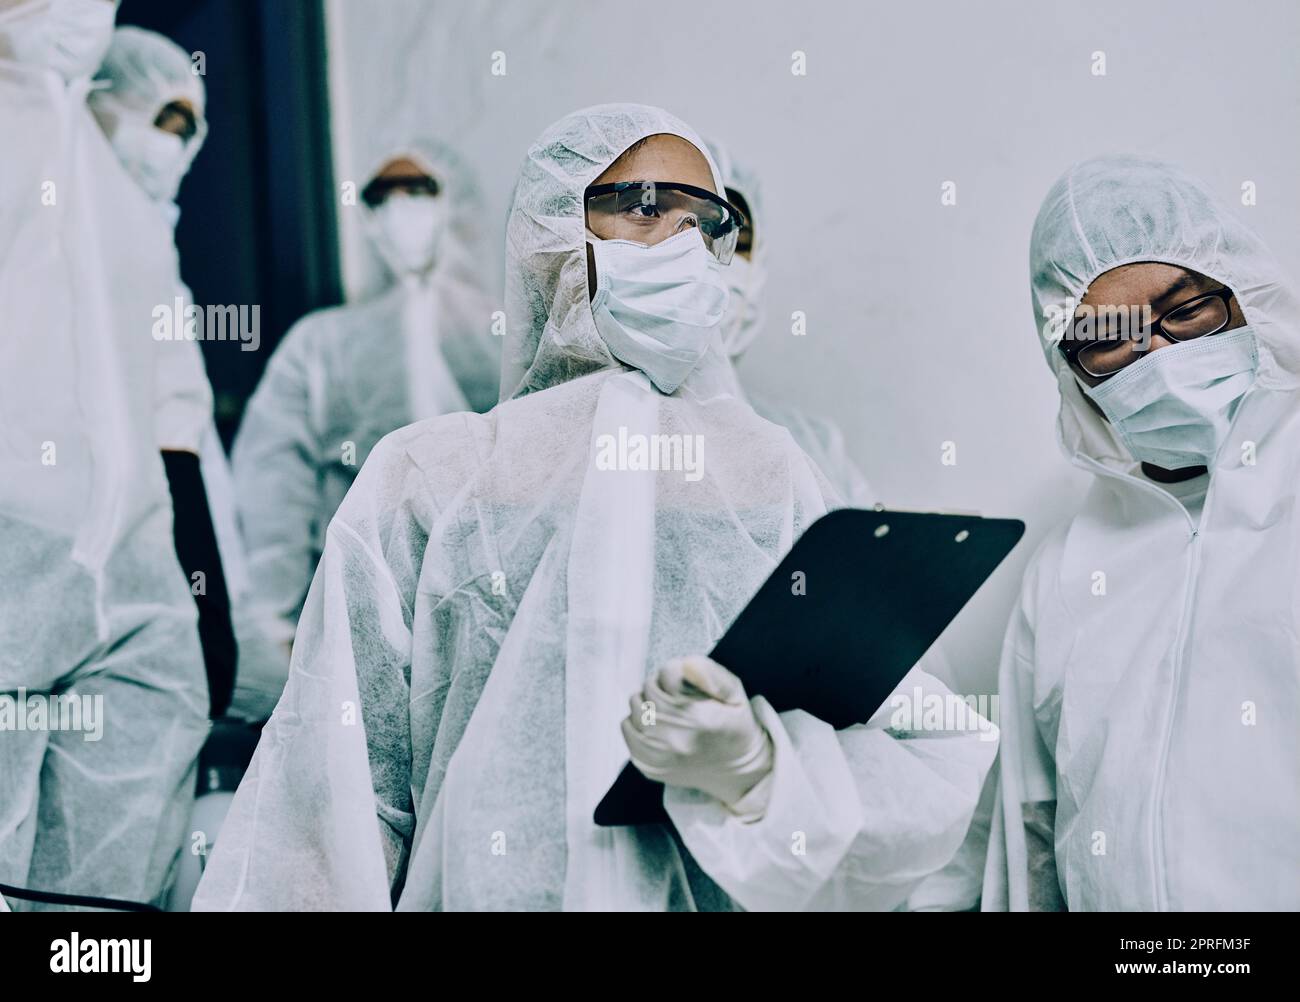 Doctors, healthcare workers and health team doing inspection, cleaning a building during covid pandemic and checking for danger. Employees wearing masks to protect from virus at a working site Stock Photo